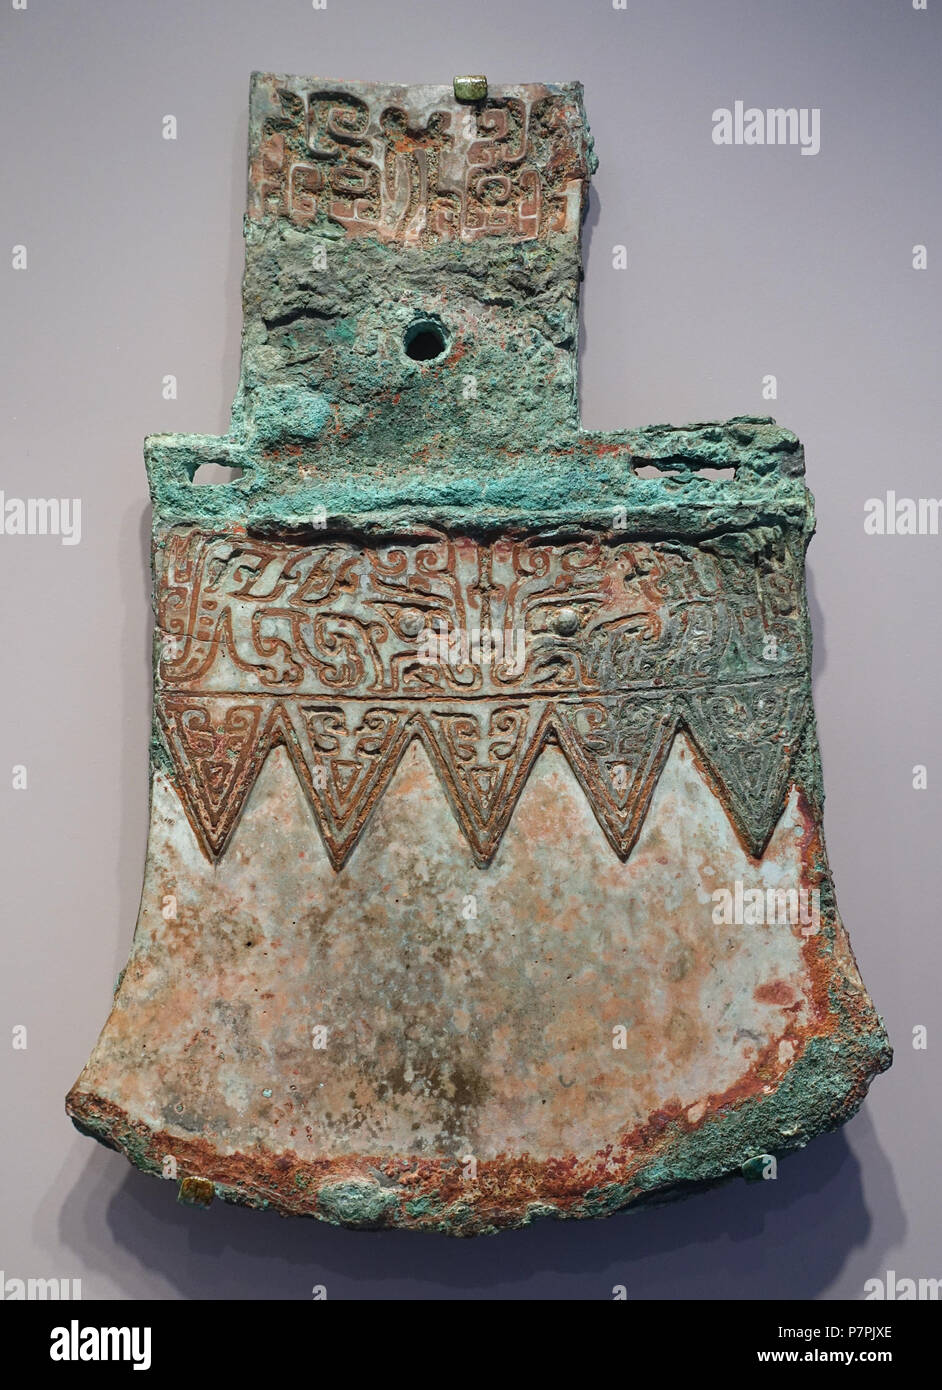 English: Exhibit in the Arthur M. Sackler Museum, Harvard University, Cambridge, Massachusetts, USA. This artwork is in the  because the artist died more than 70 years ago. 11 April 2015, 10:46:35 63 Ceremonial Axe, China, Shang dynasty, 14th-11th century BC, cast bronze - Arthur M. Sackler Museum, Harvard University - DSC00776 Stock Photo